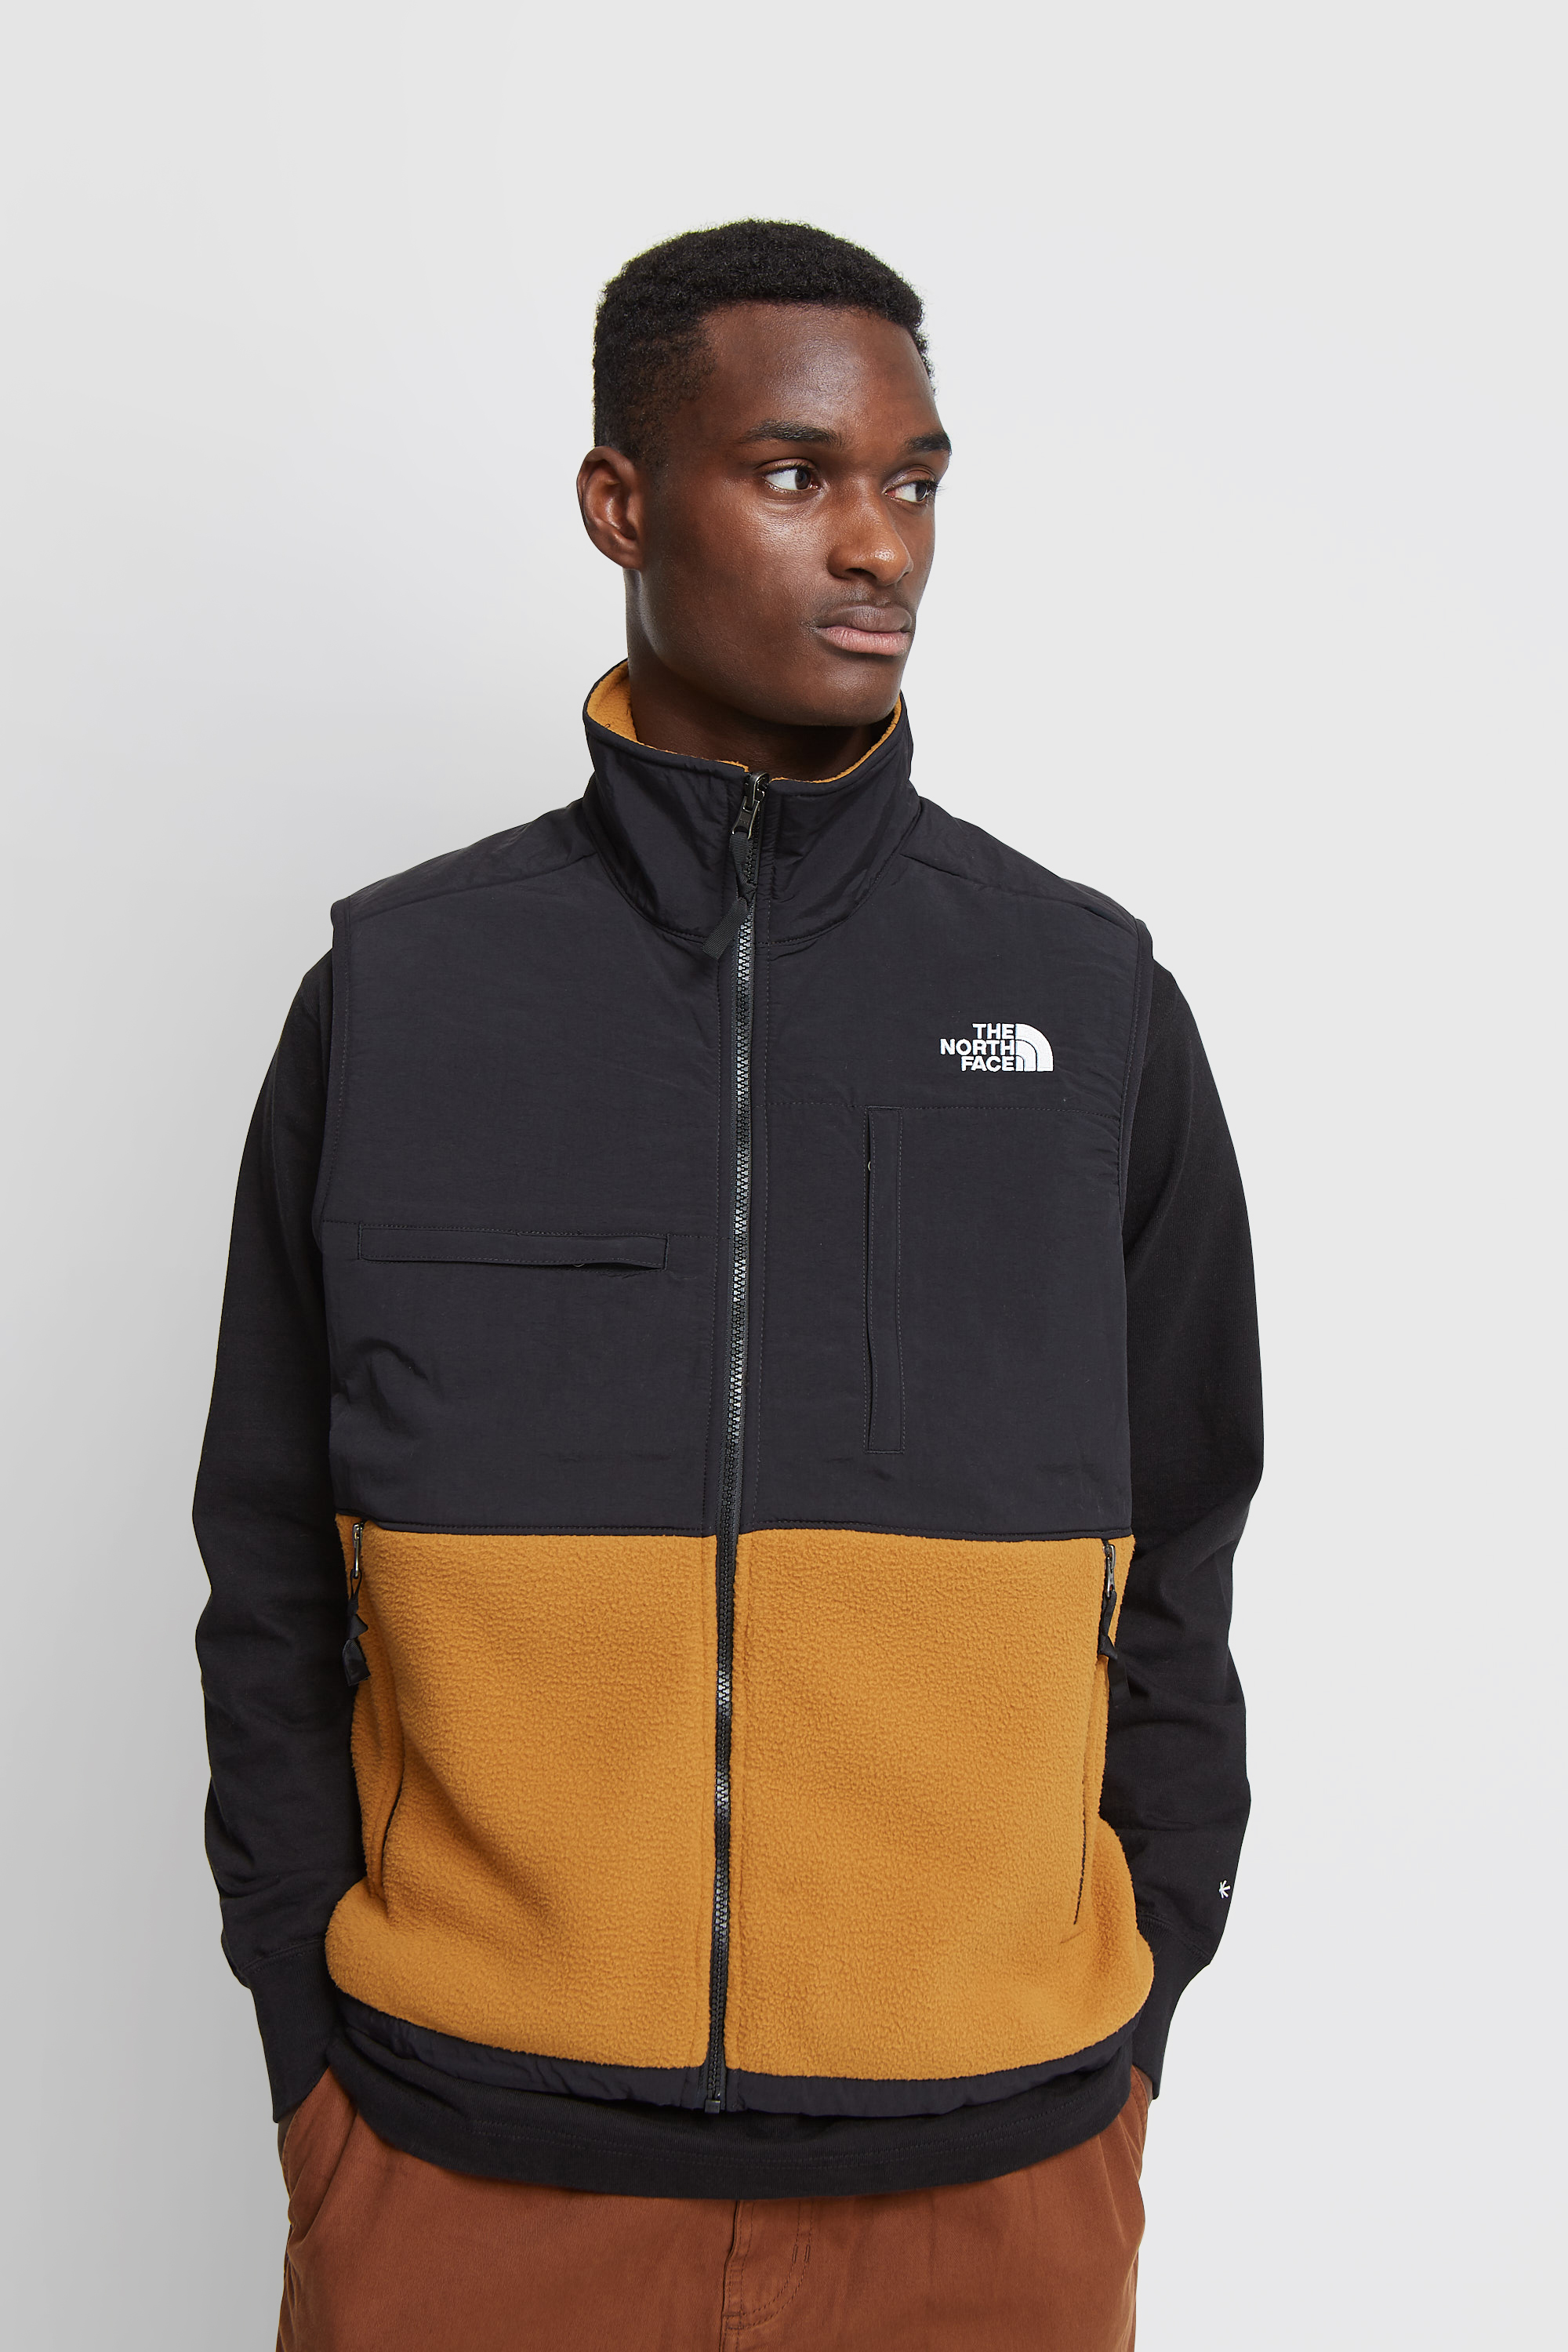 north face classic jacket